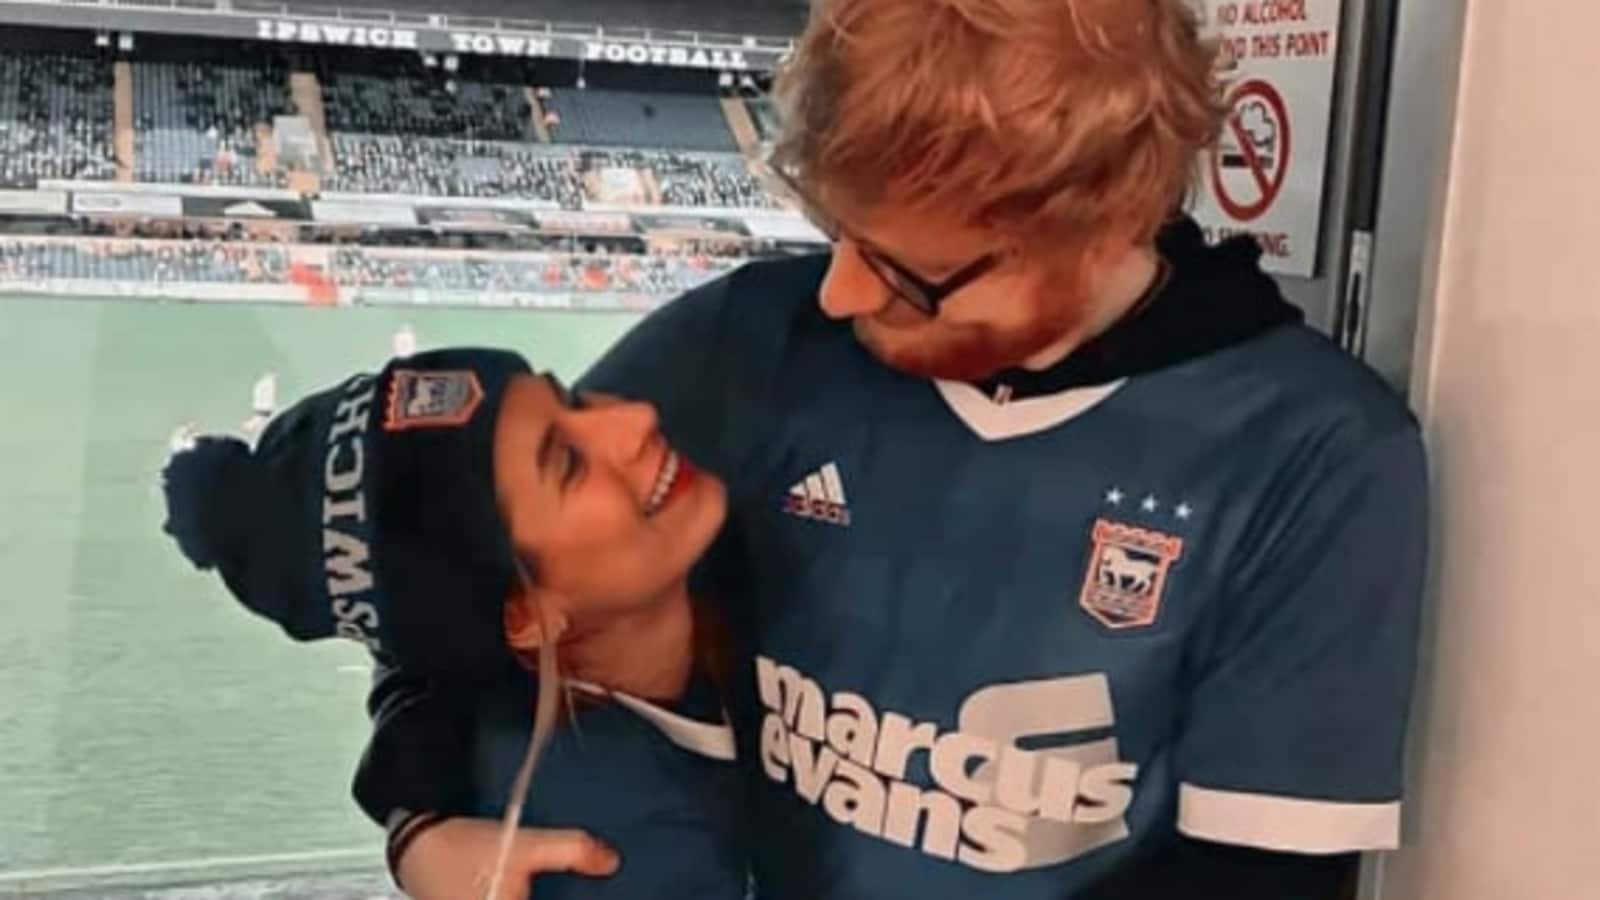 Ed Sheeran welcomes ‘another beautiful baby girl’ with wife Cherry Seaborn, posts cute pic to make announcement